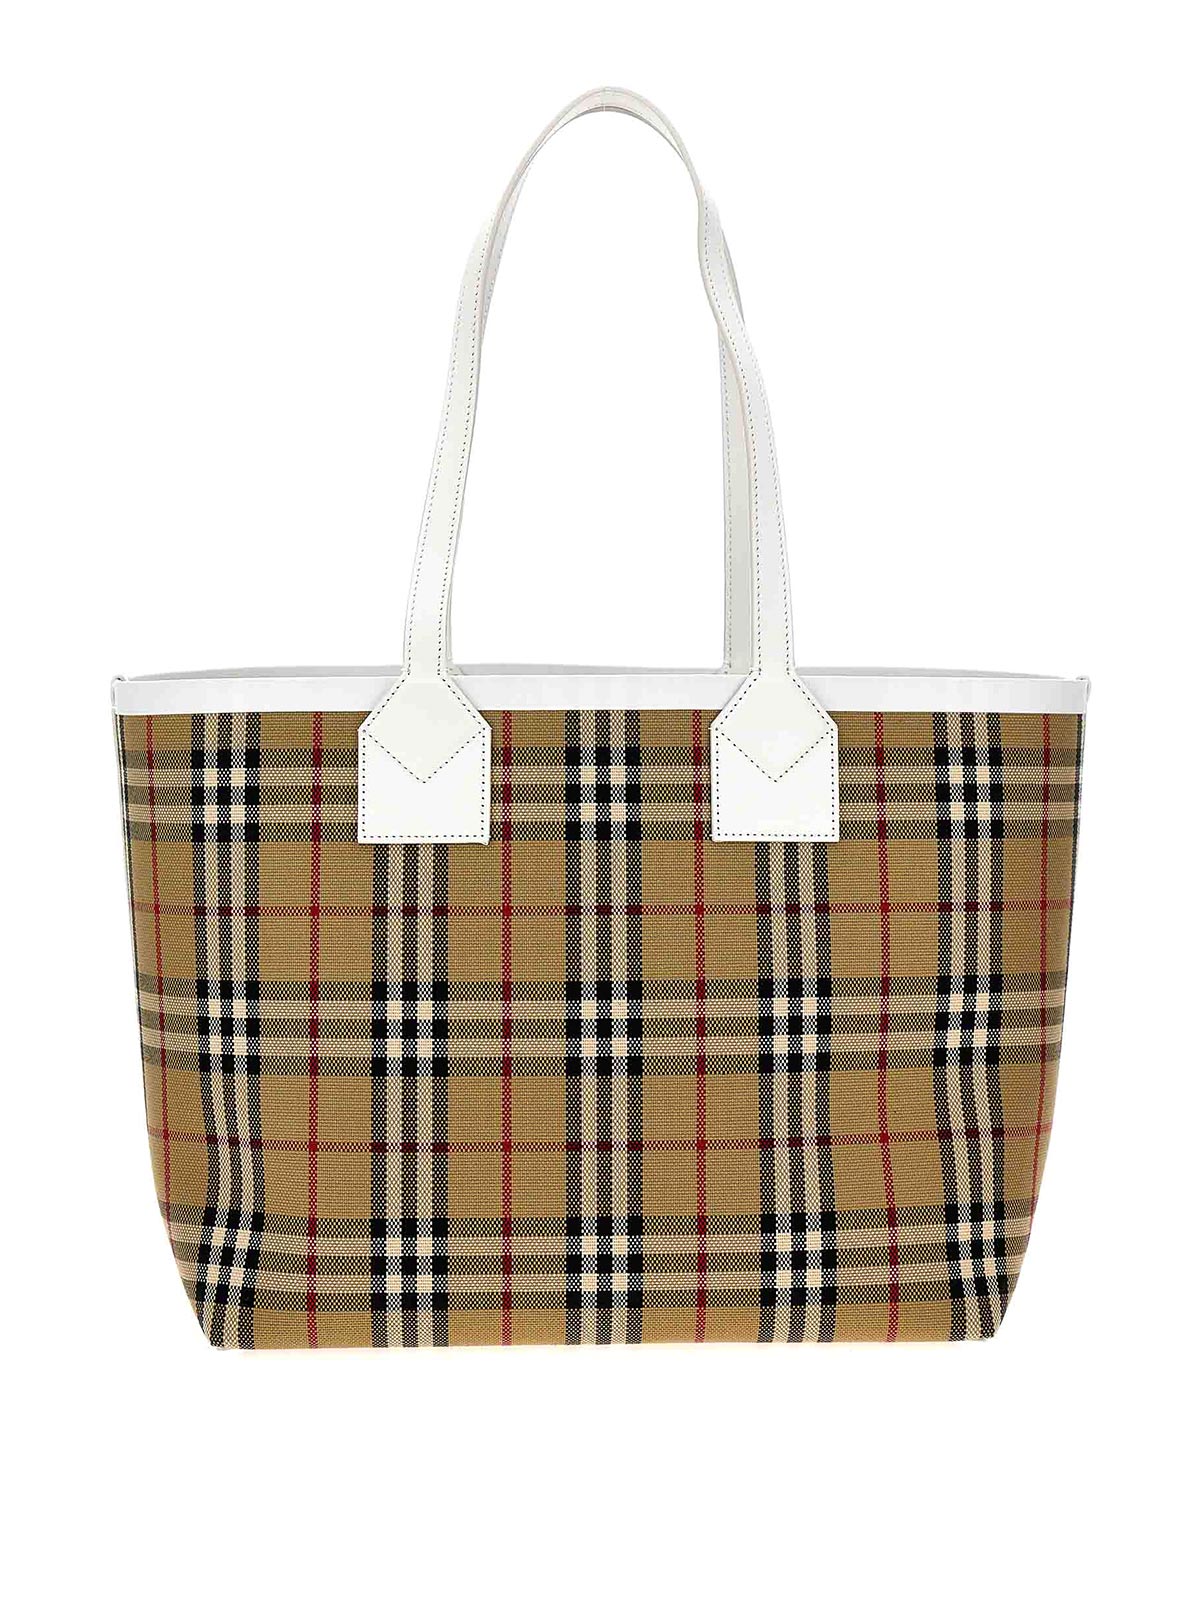 Burberry London Shopping Bag In Multicolor